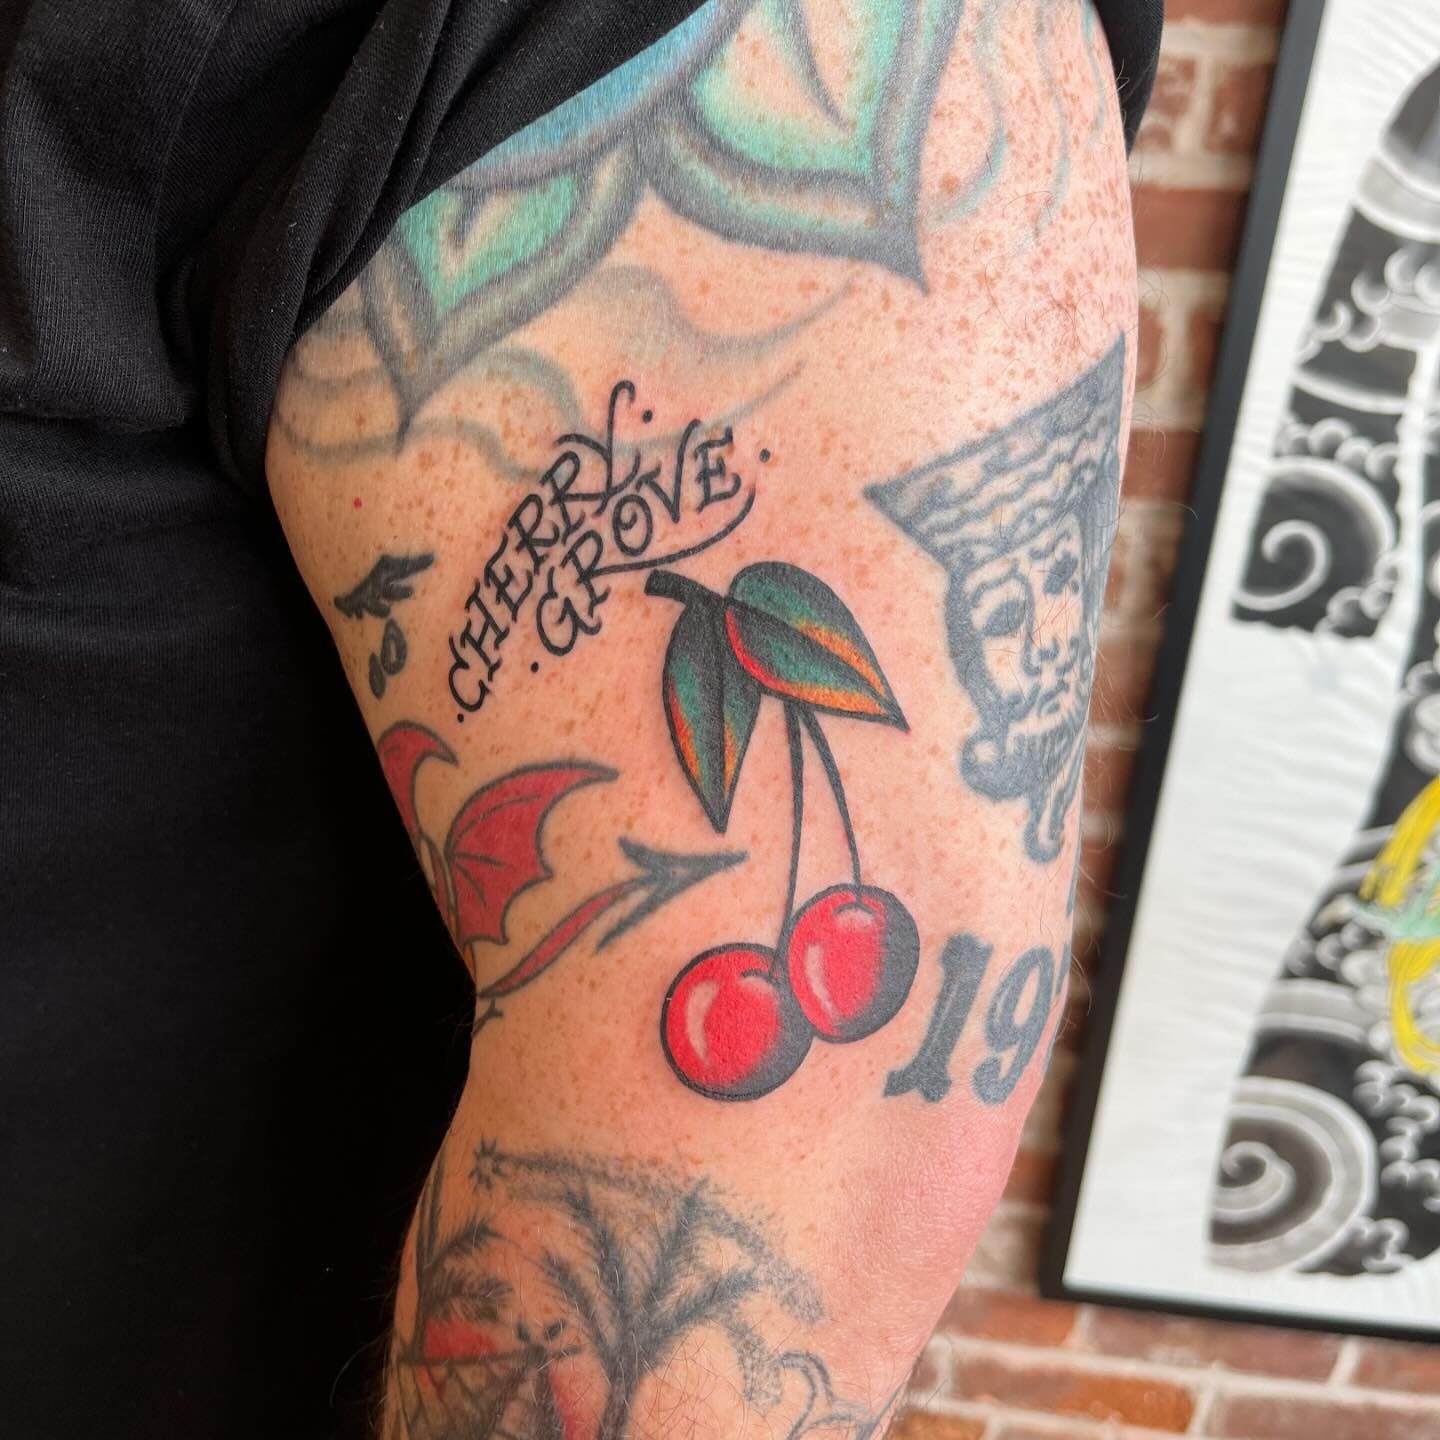 🍒 One for Cherry Grove on Tony 🍒 Thanks for letting me draw this one to fit! @greenpointtattooco 

😘 Let&rsquo;s do more fun tattoos like this! I&rsquo;ve got time the rest of this month and May! Tap the link in my bio to book!

#cherry #cherrytat